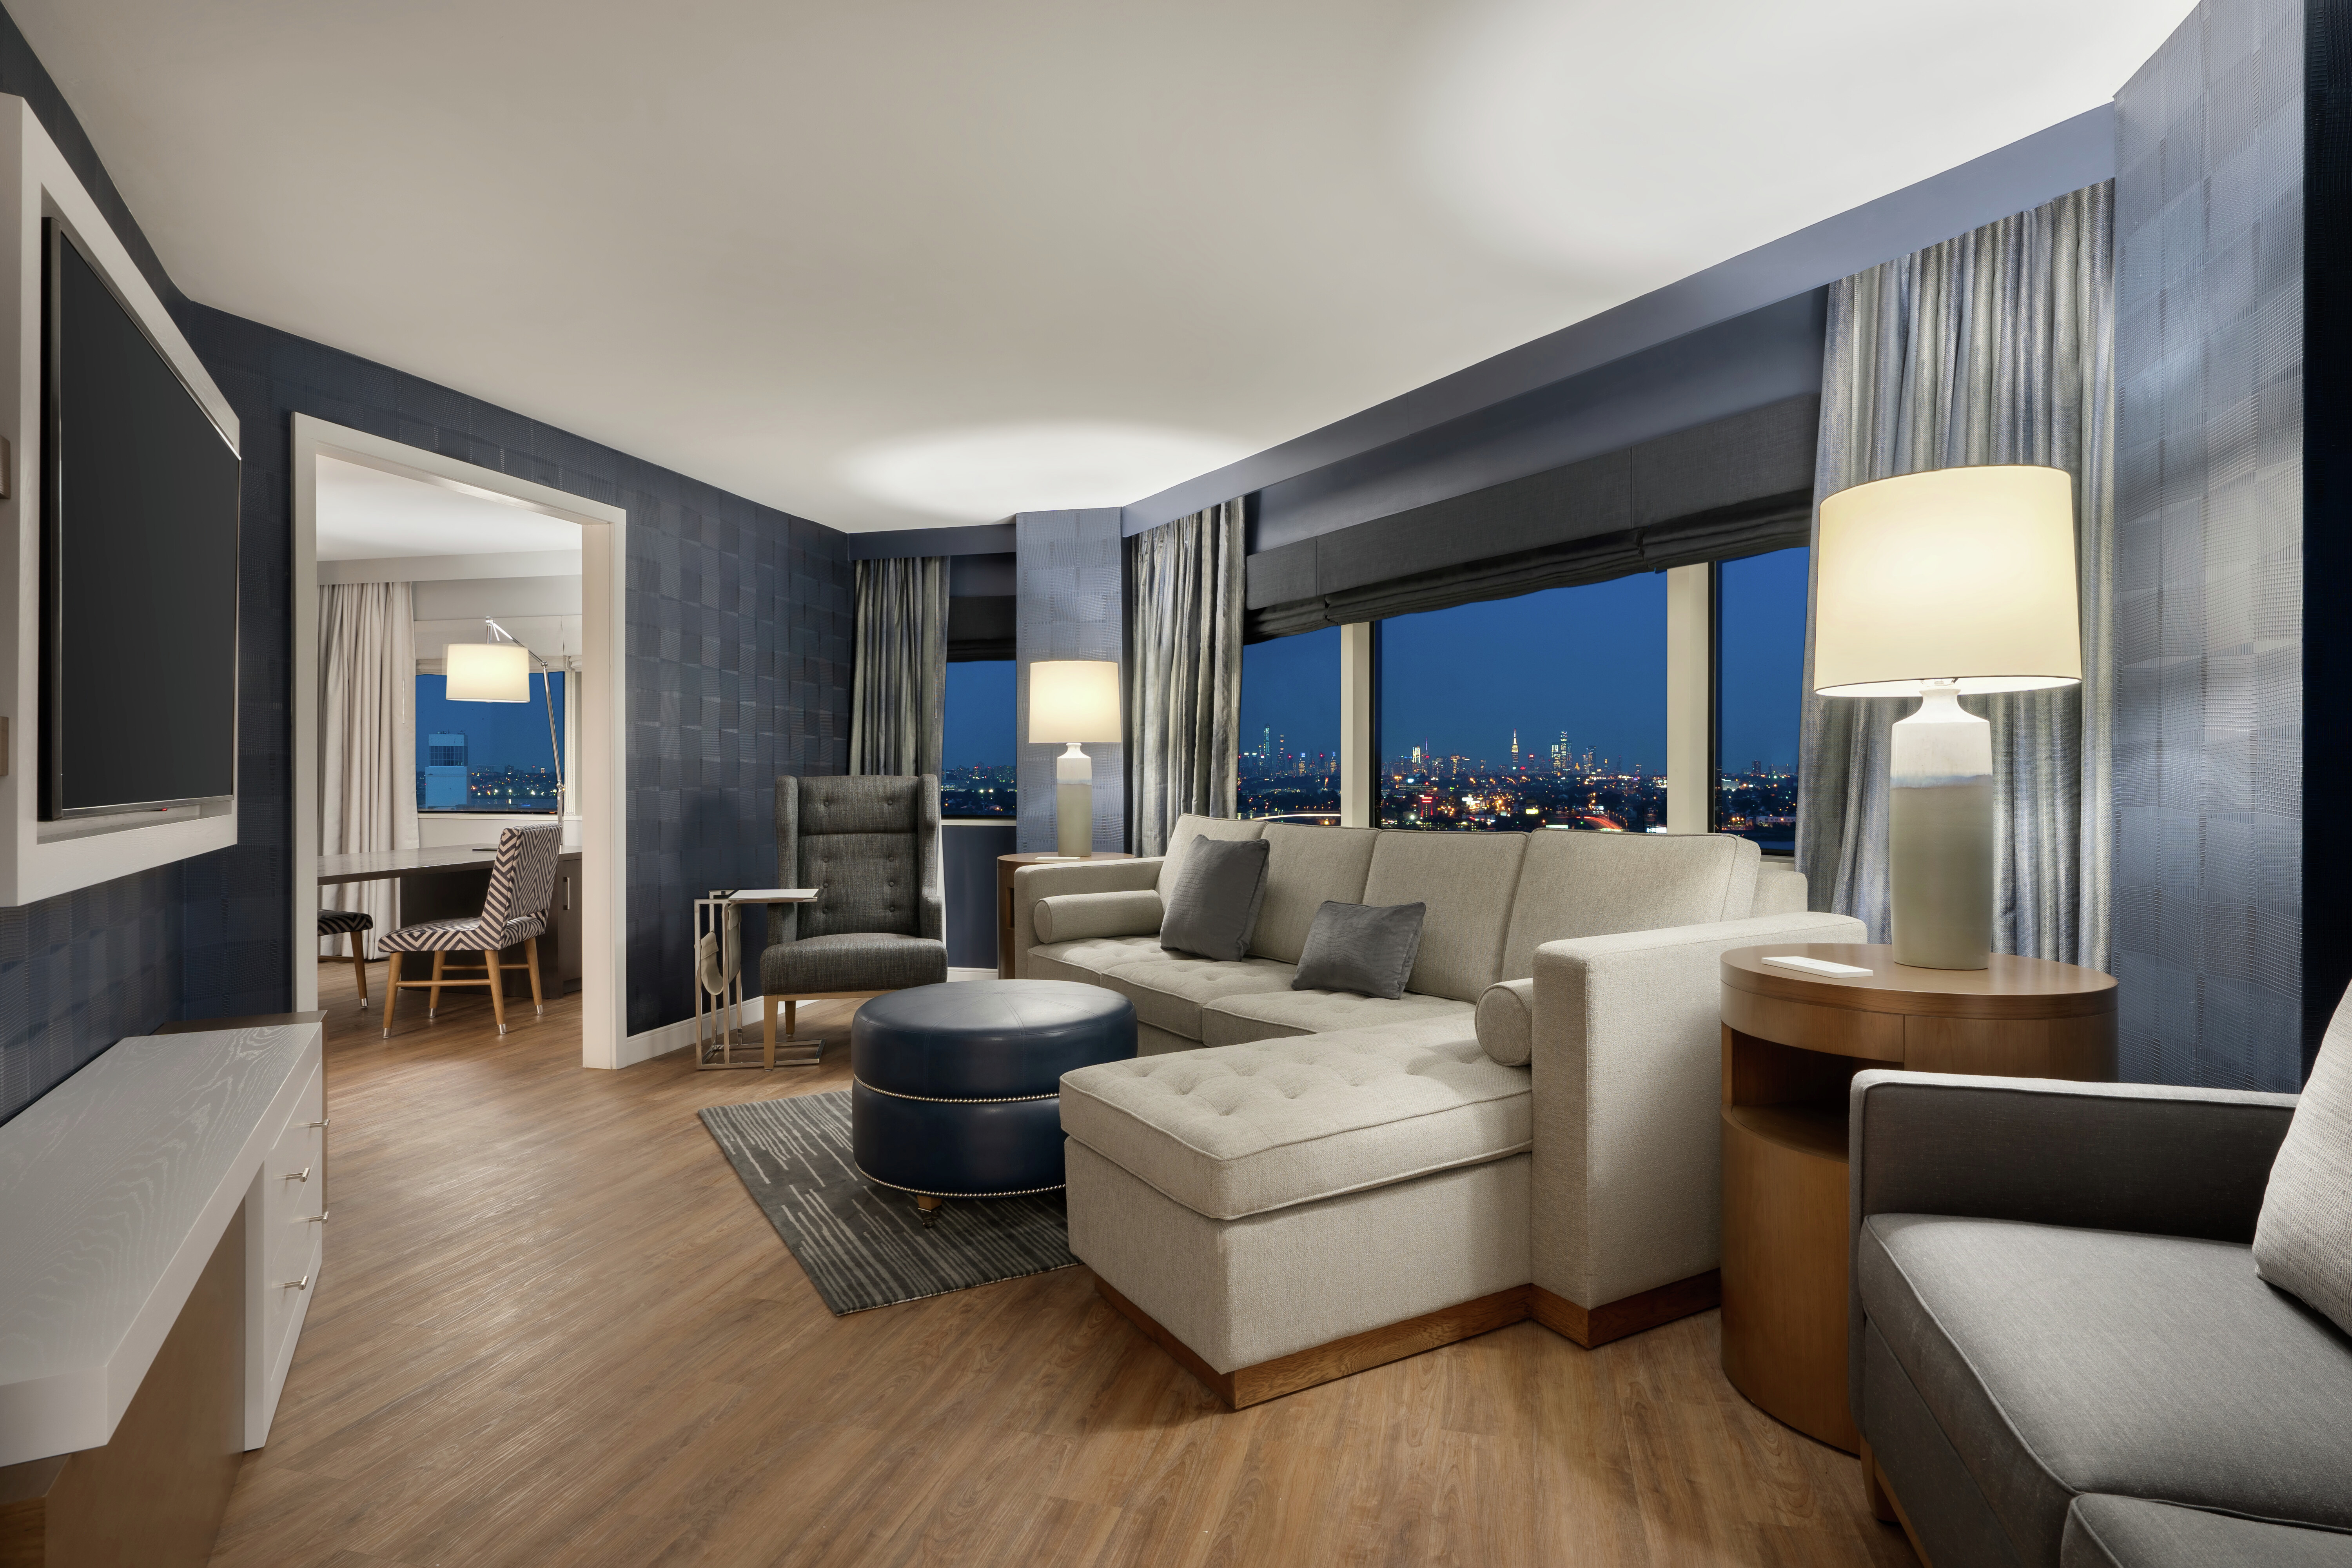 Suite Living Room with Large Windows and City Views